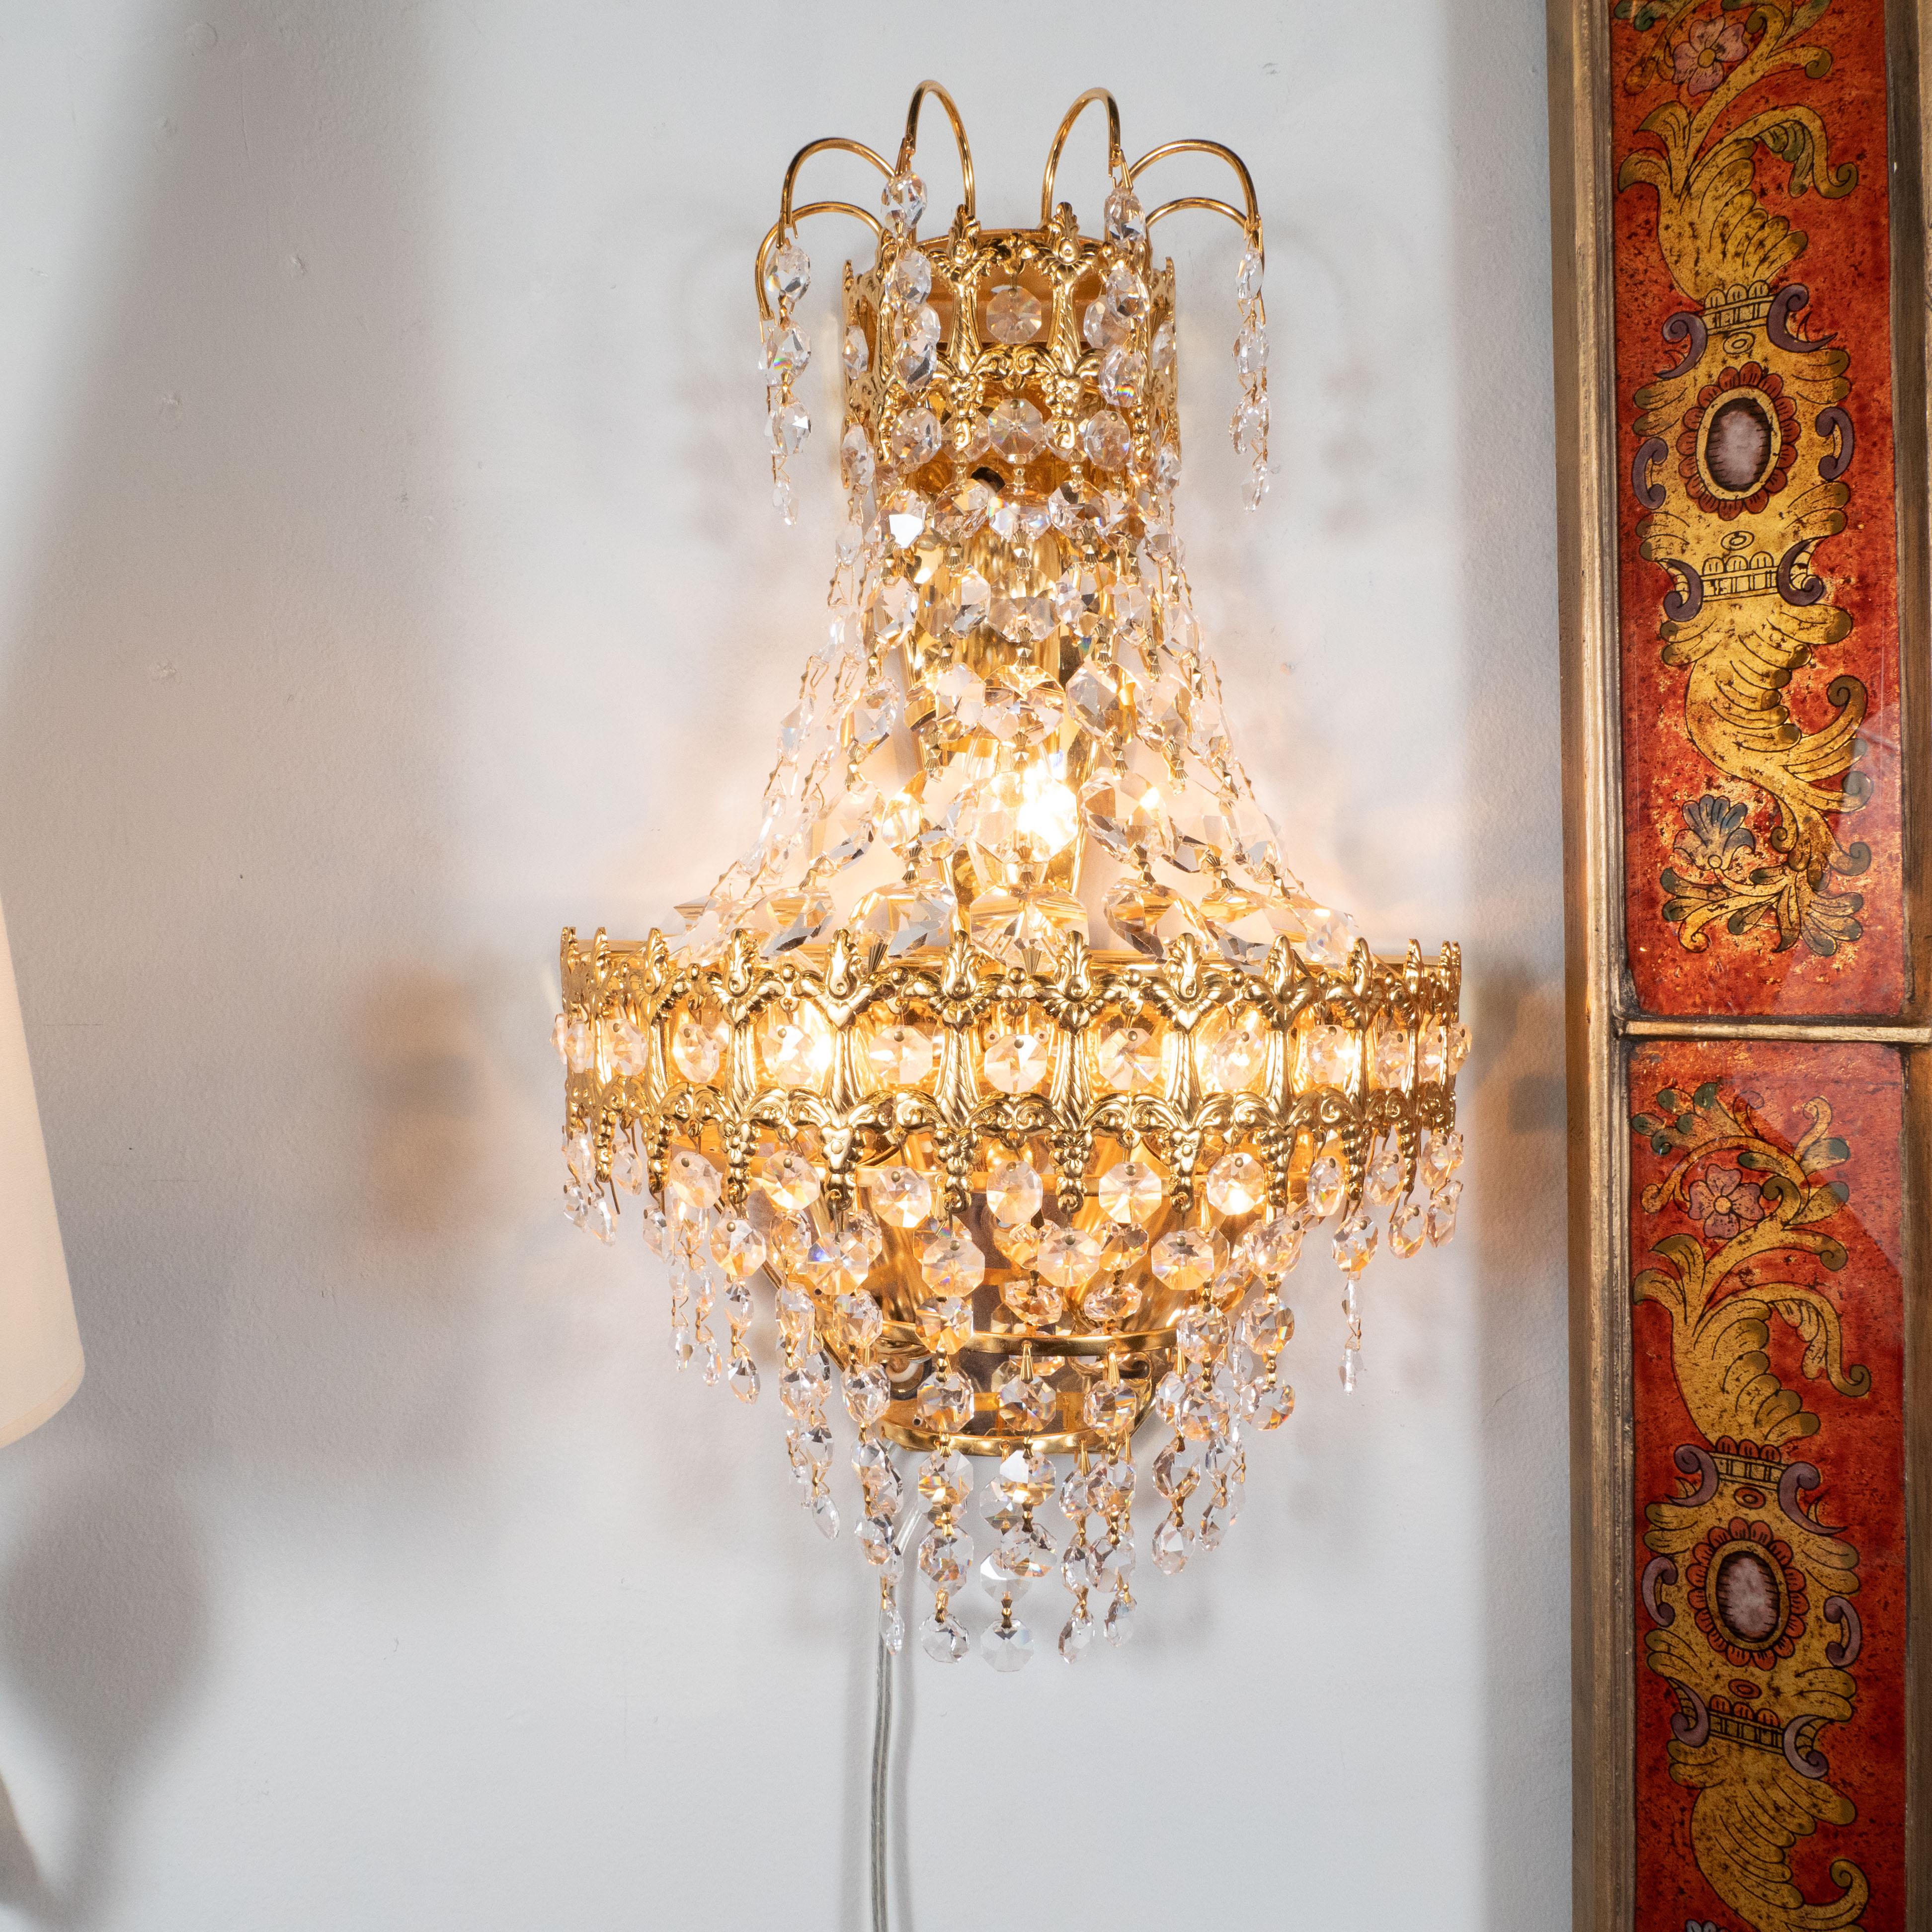 This glamorous pair of Hollywood Regency sconces were realized in the United States, circa 1945. They feature two demilune gold plated tiers with neoclassical detailing connected by strands of octagonal faceted crystal pendants. Crystals of the same